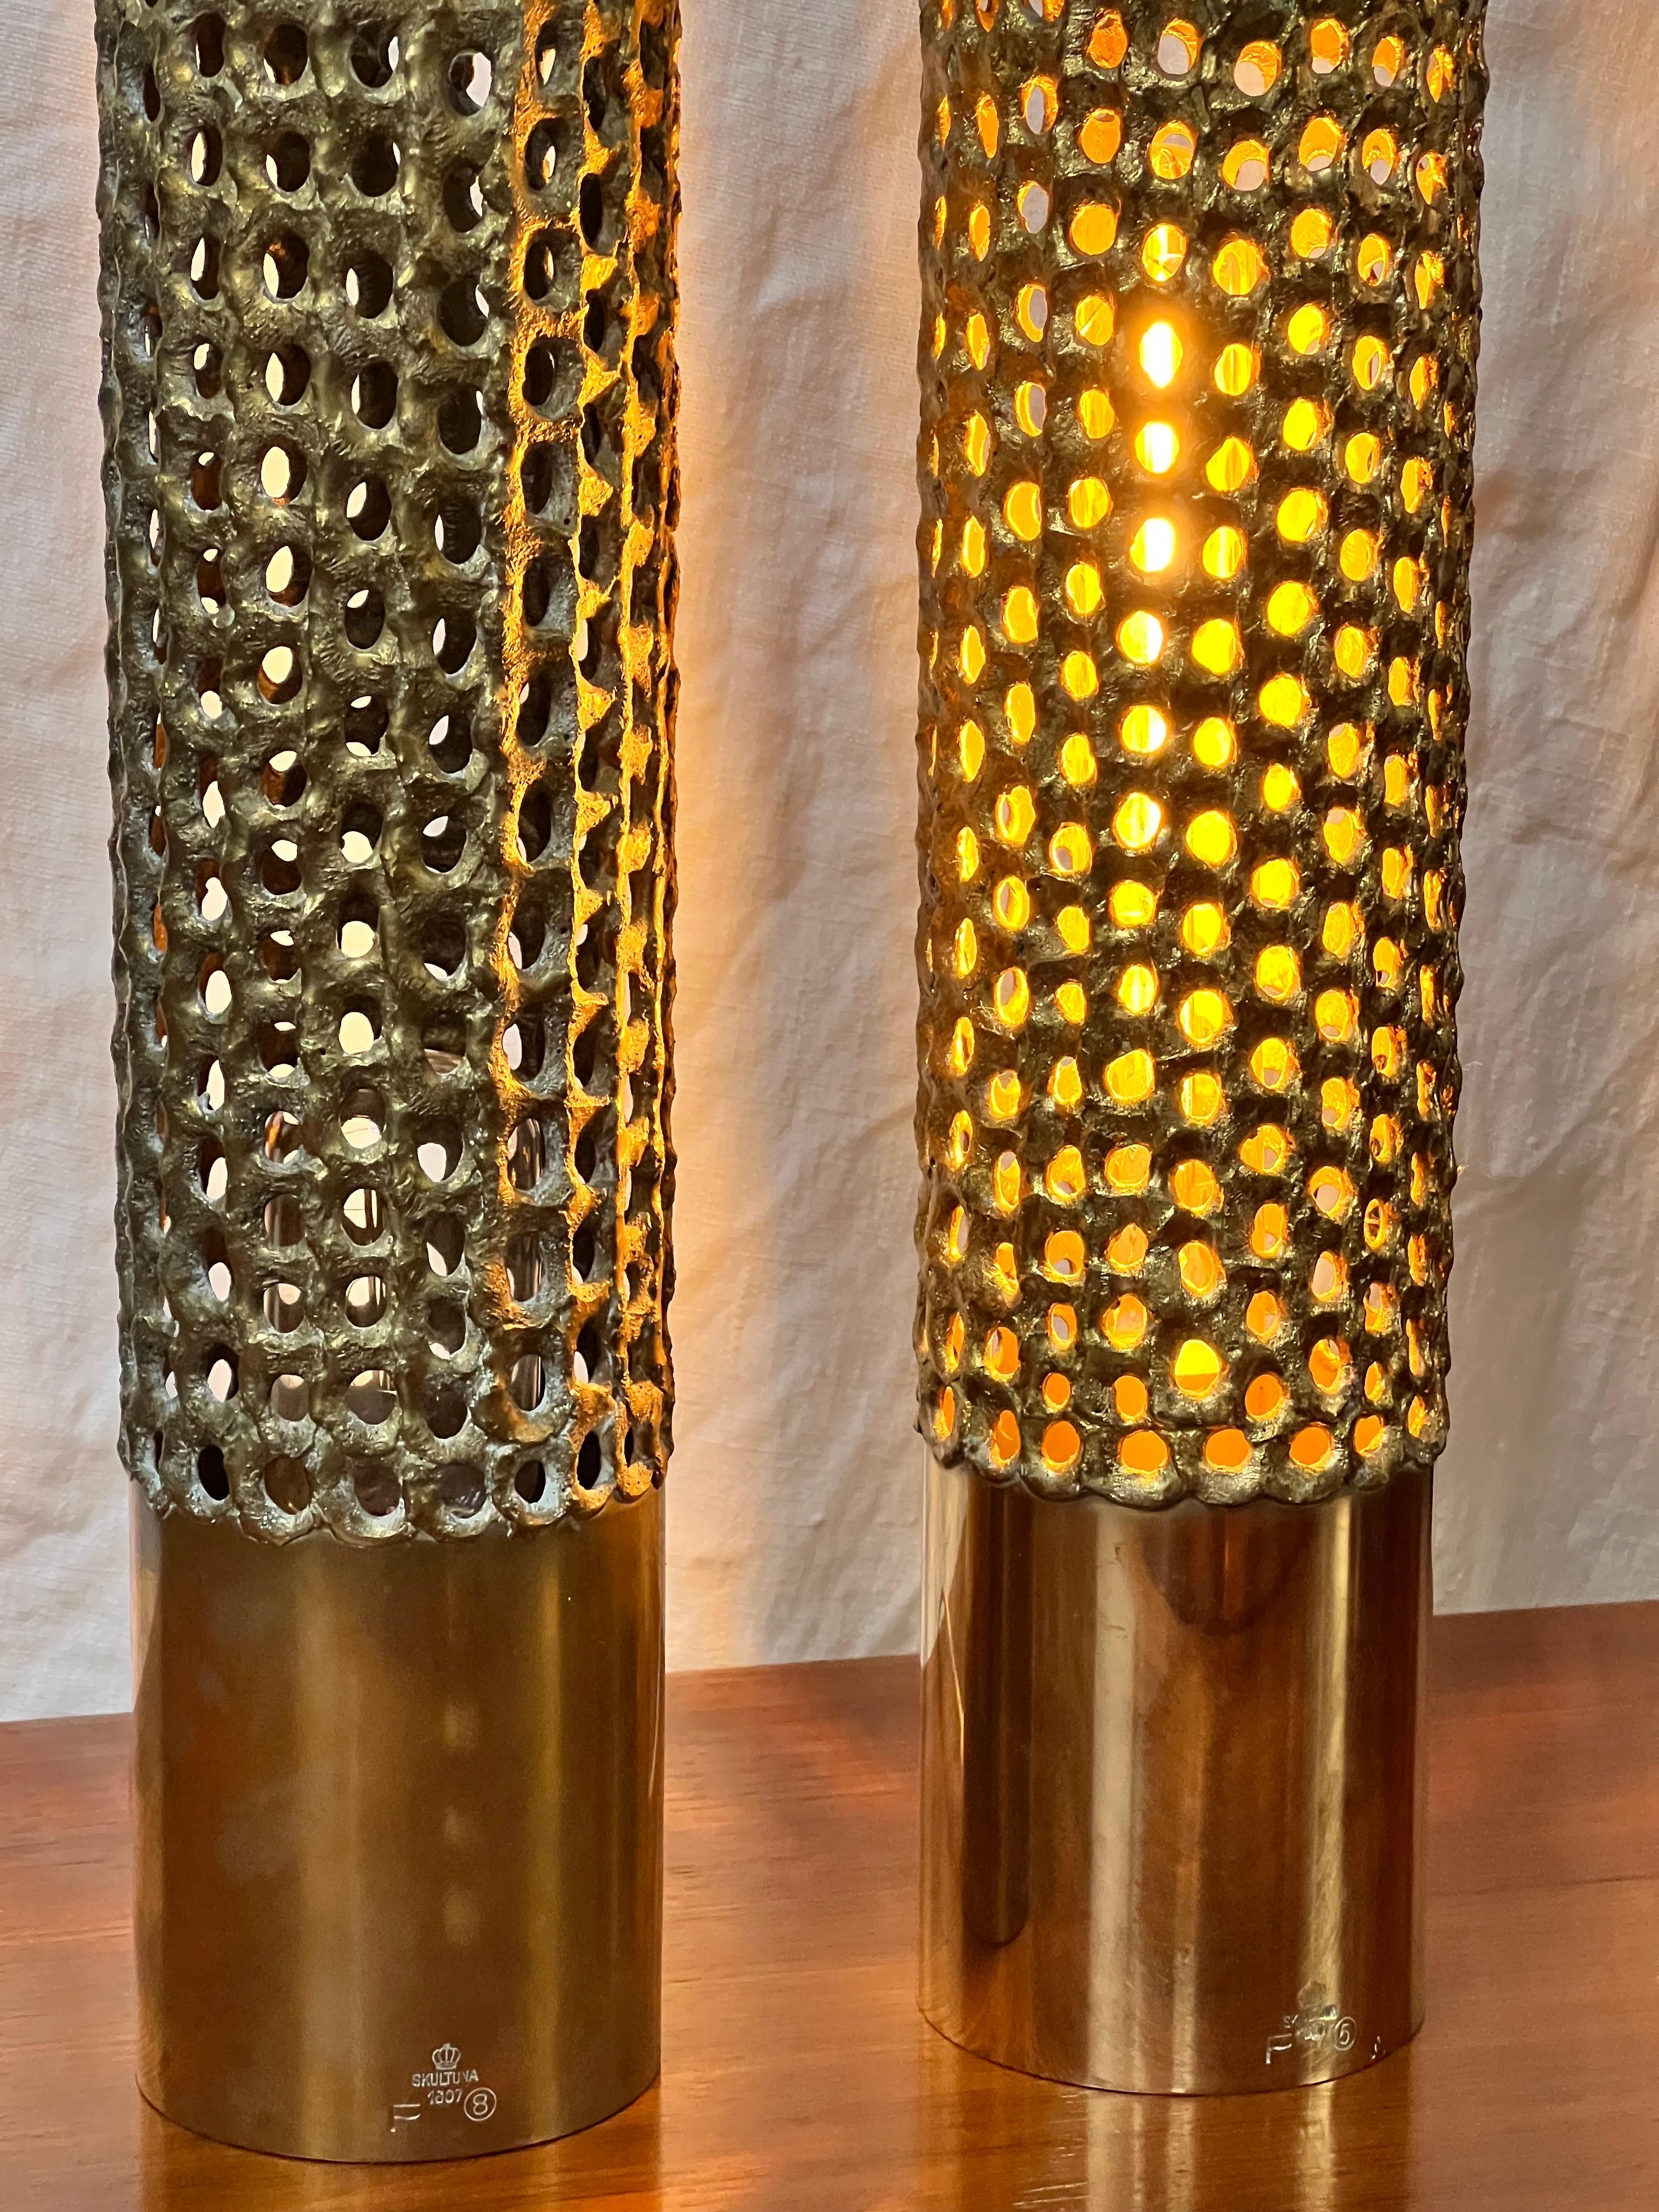 Scandinavian Modern Pierre Forssell Brass Lamp Stamped 1975 and 1978 Produced in Skultuna Sweden For Sale